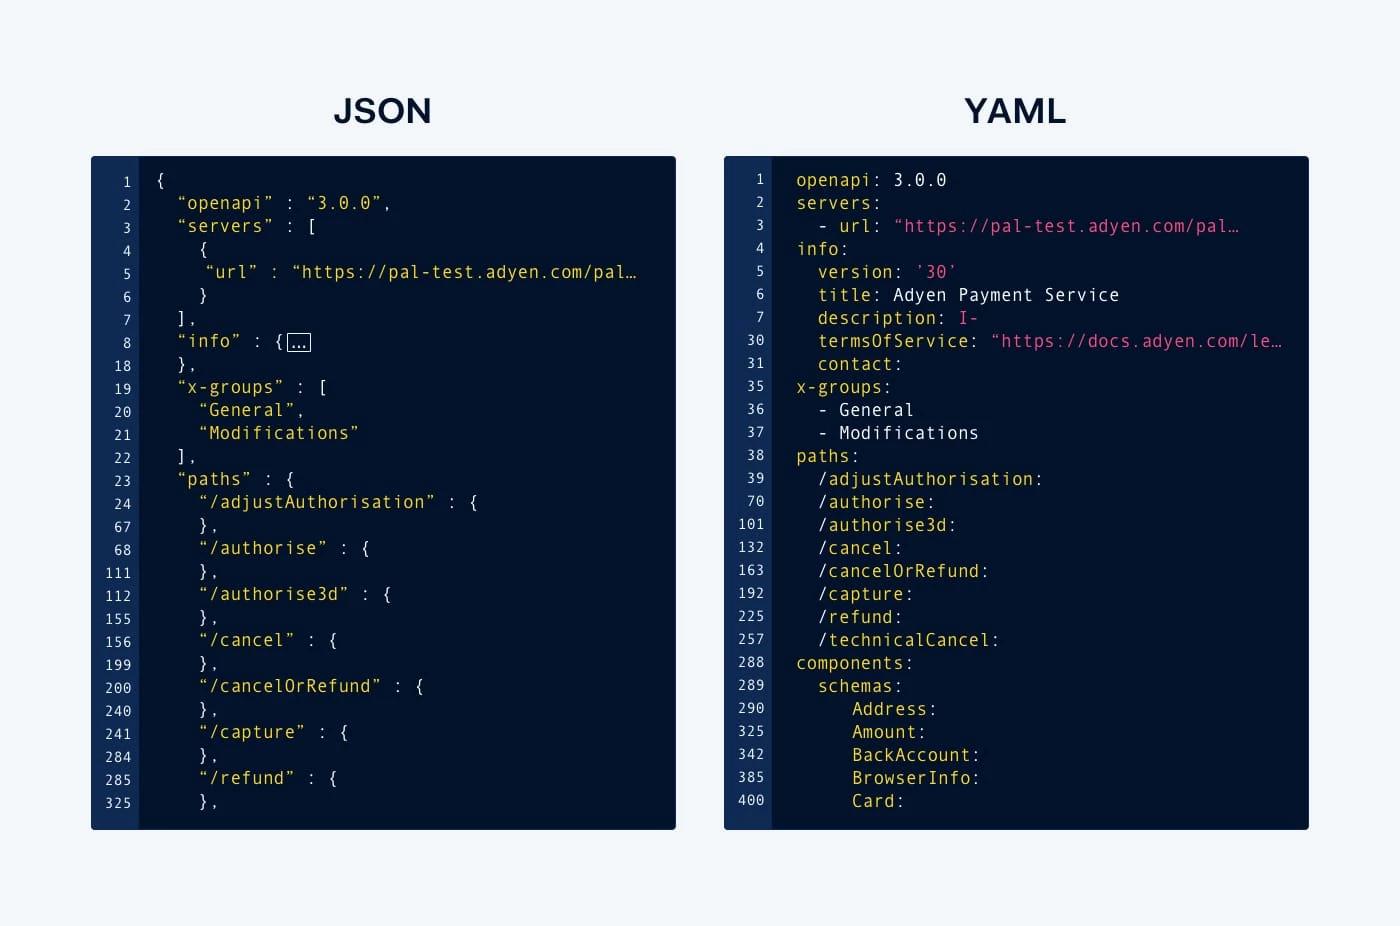 JSON vs YAML for the OpenAPI standard